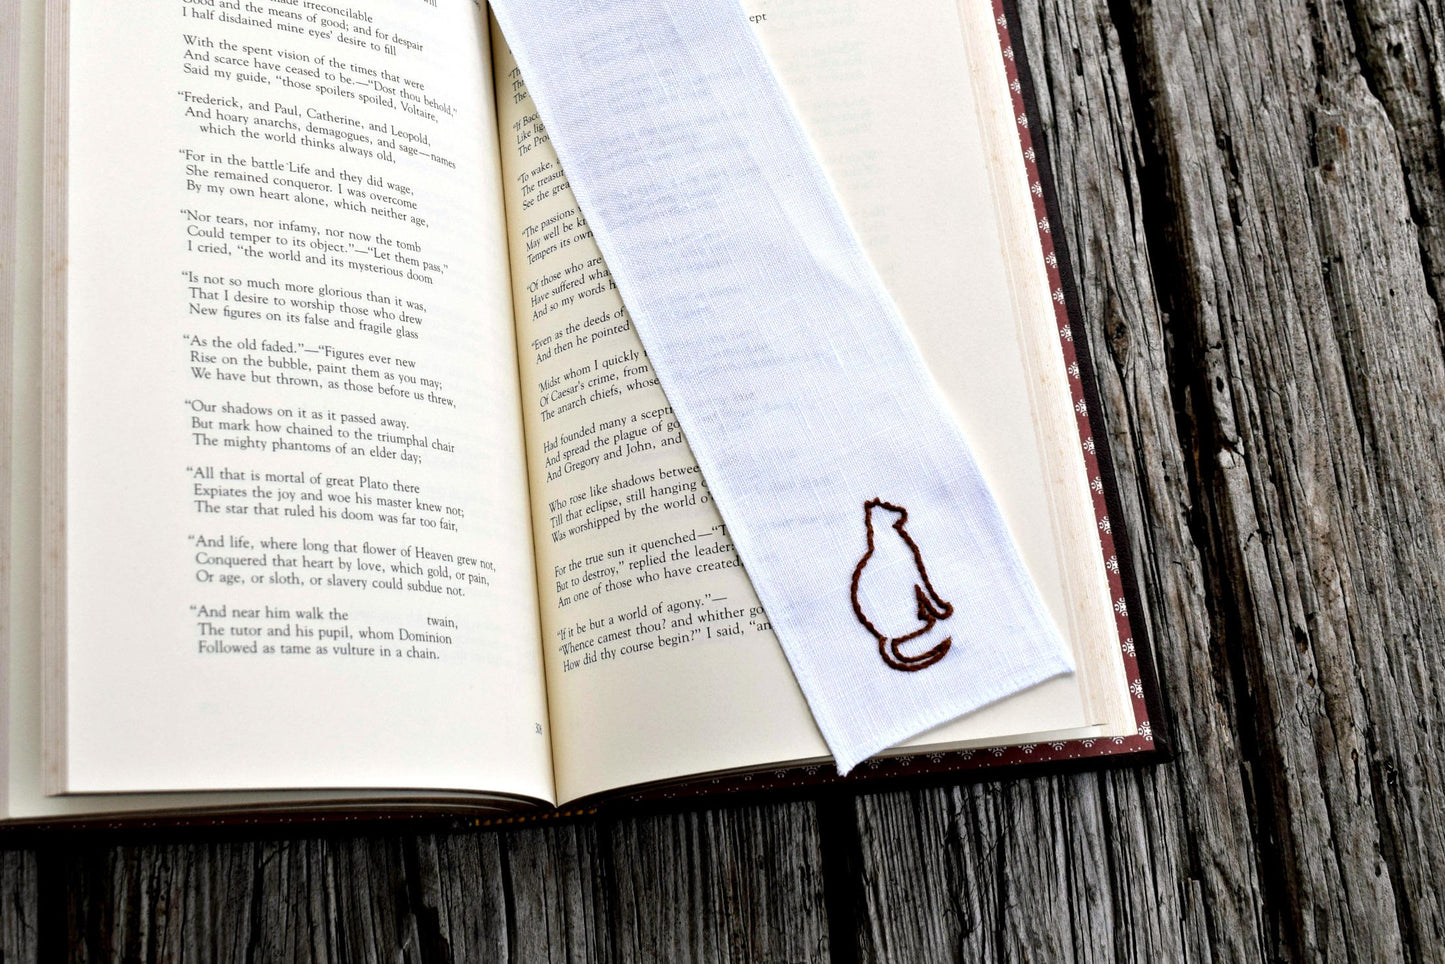 Cat outline hand stitched bookmark on open book 